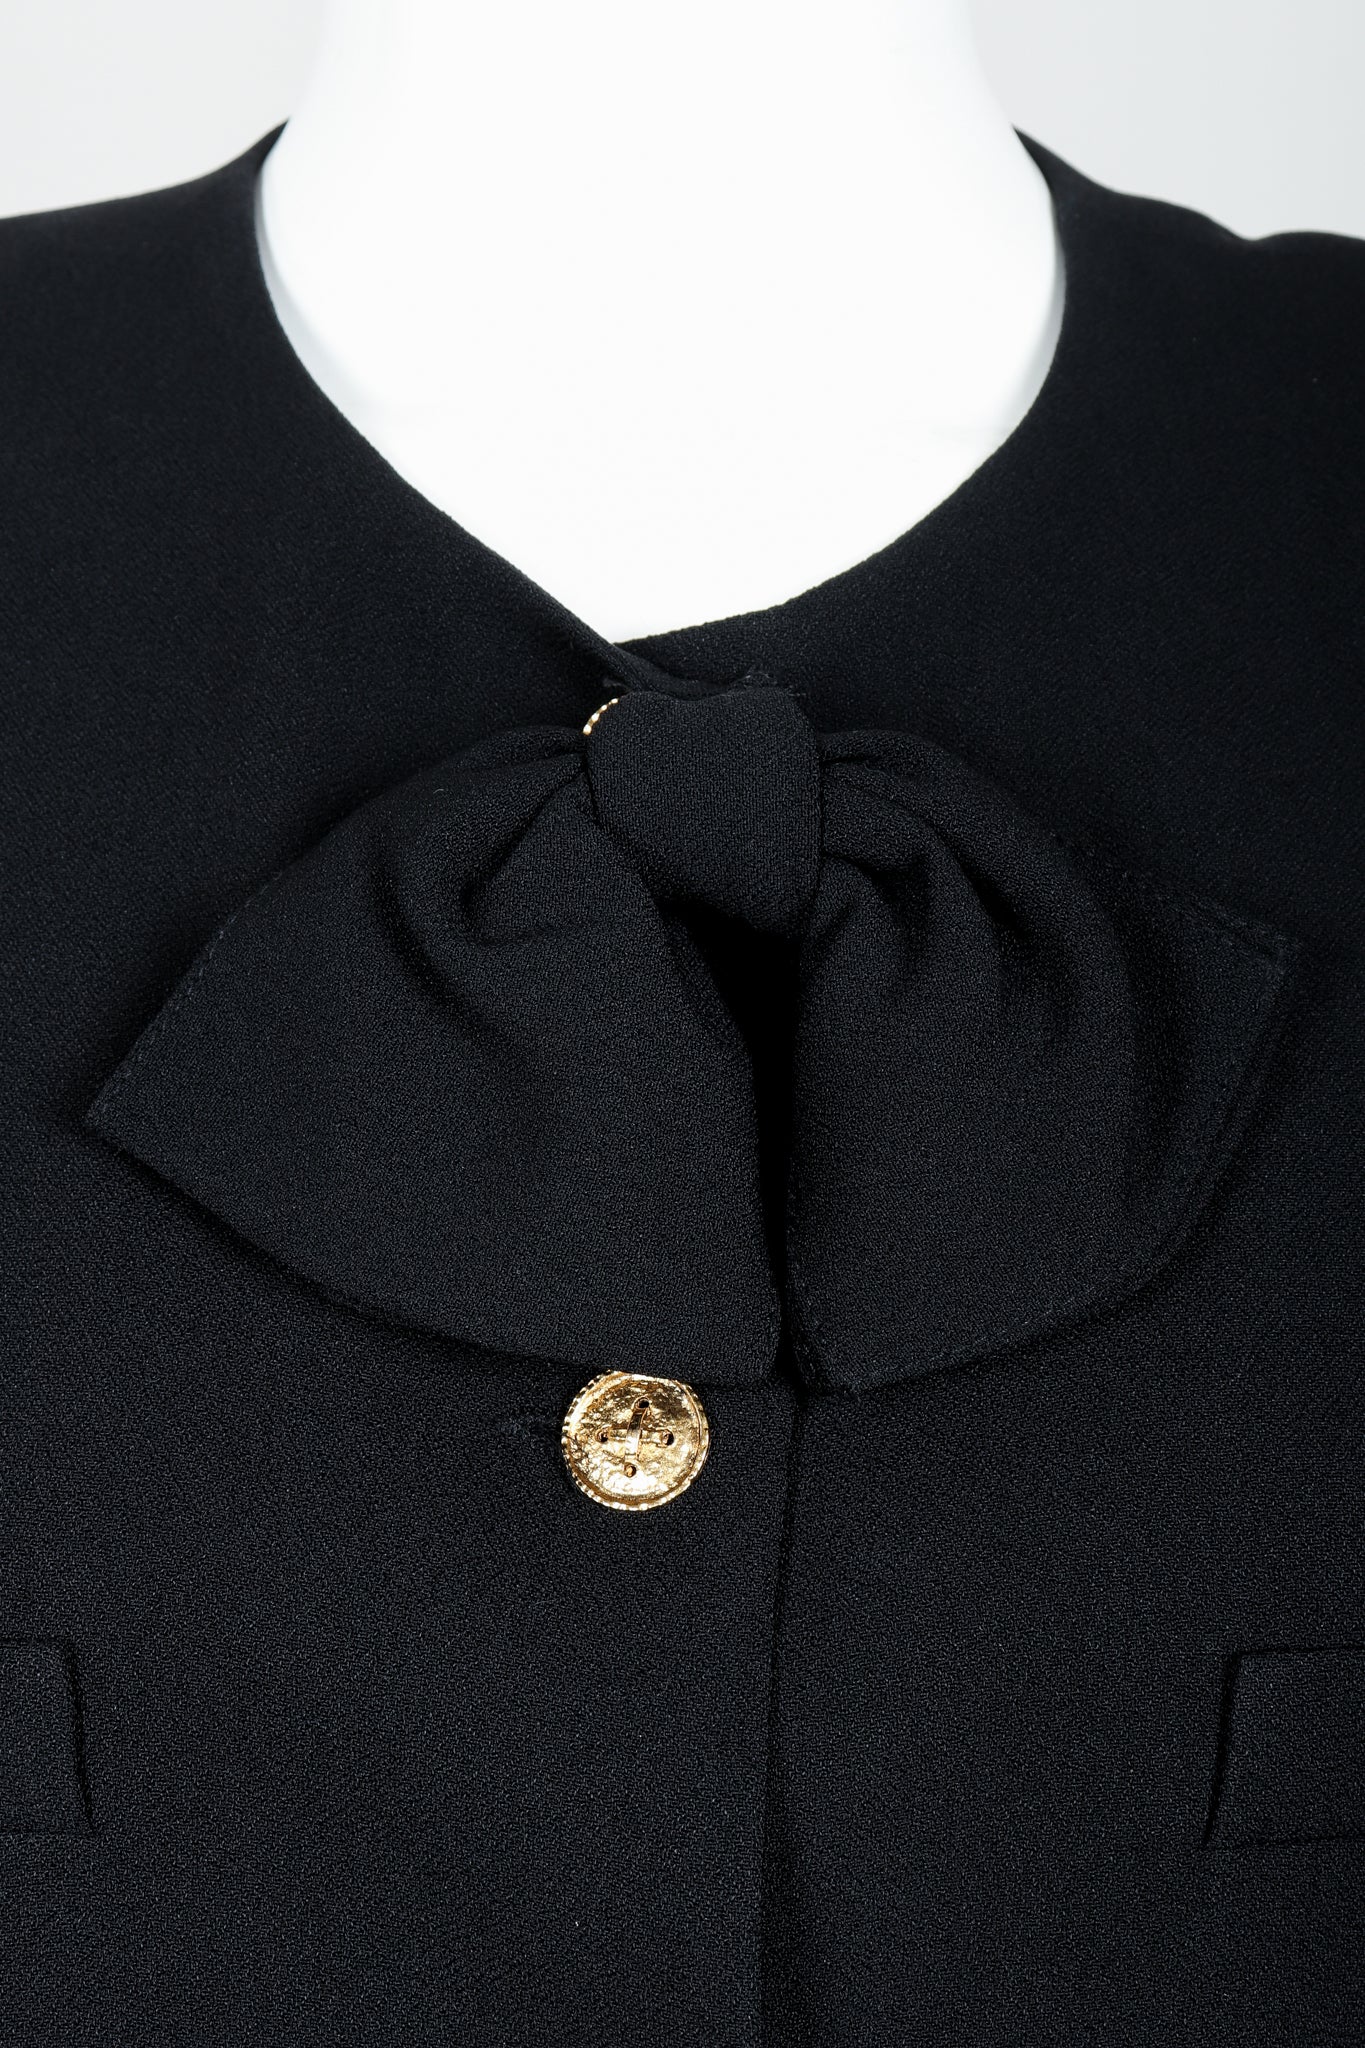 Vintage Sonia Rykiel Chanel Style Boxy Jacket Suit on Mannequin bow detail at Recess